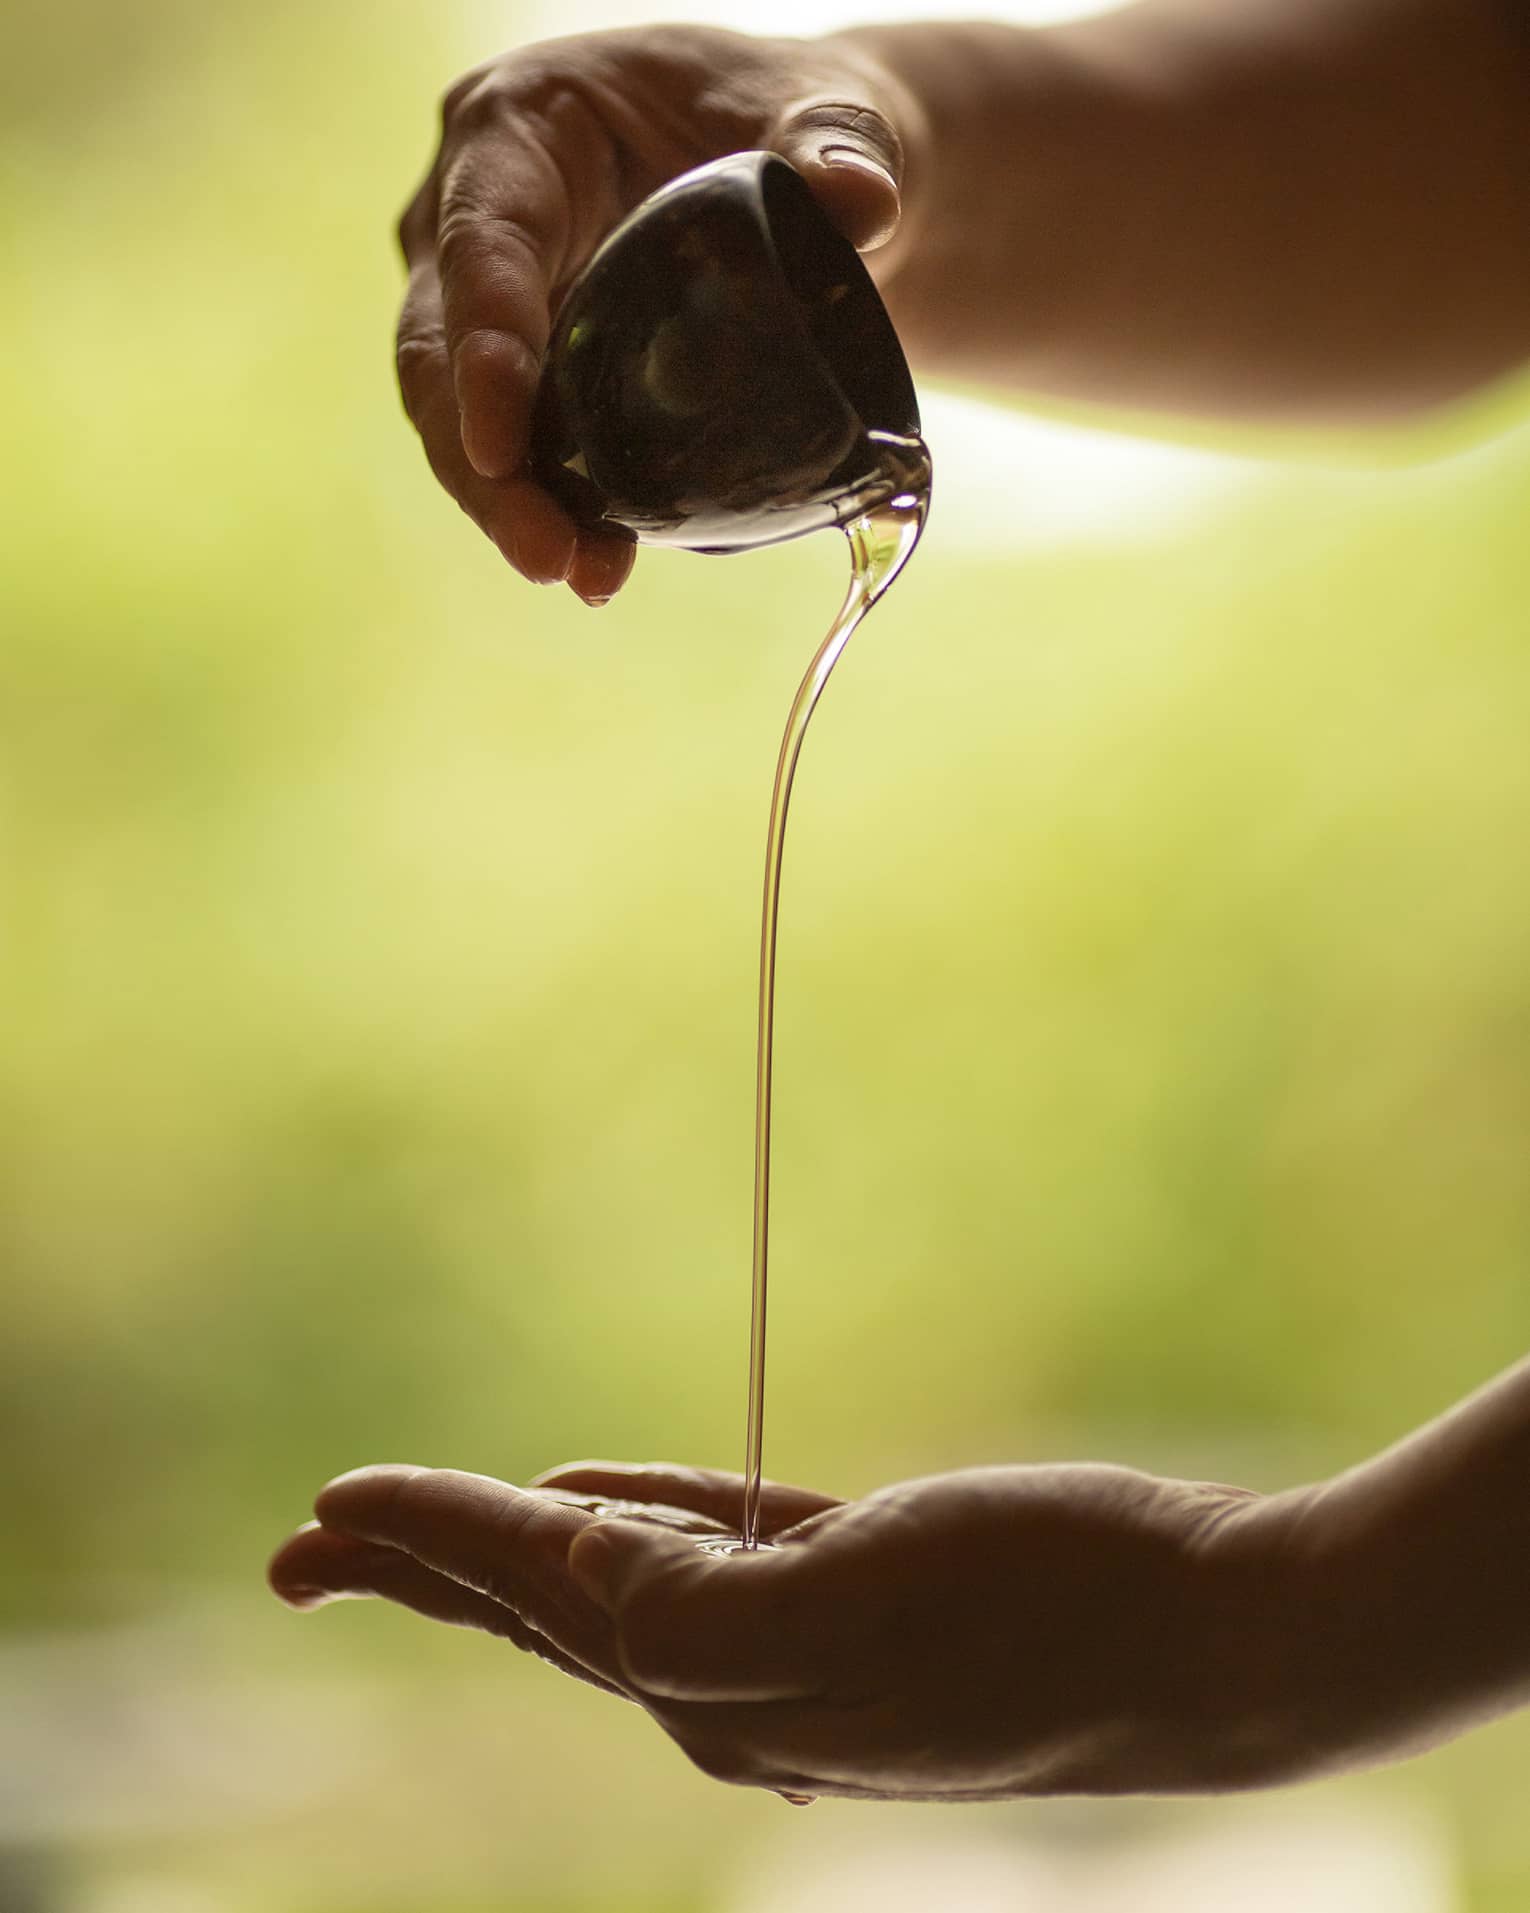 A set of hands pours massage oil from a ceramic bowl into a palm